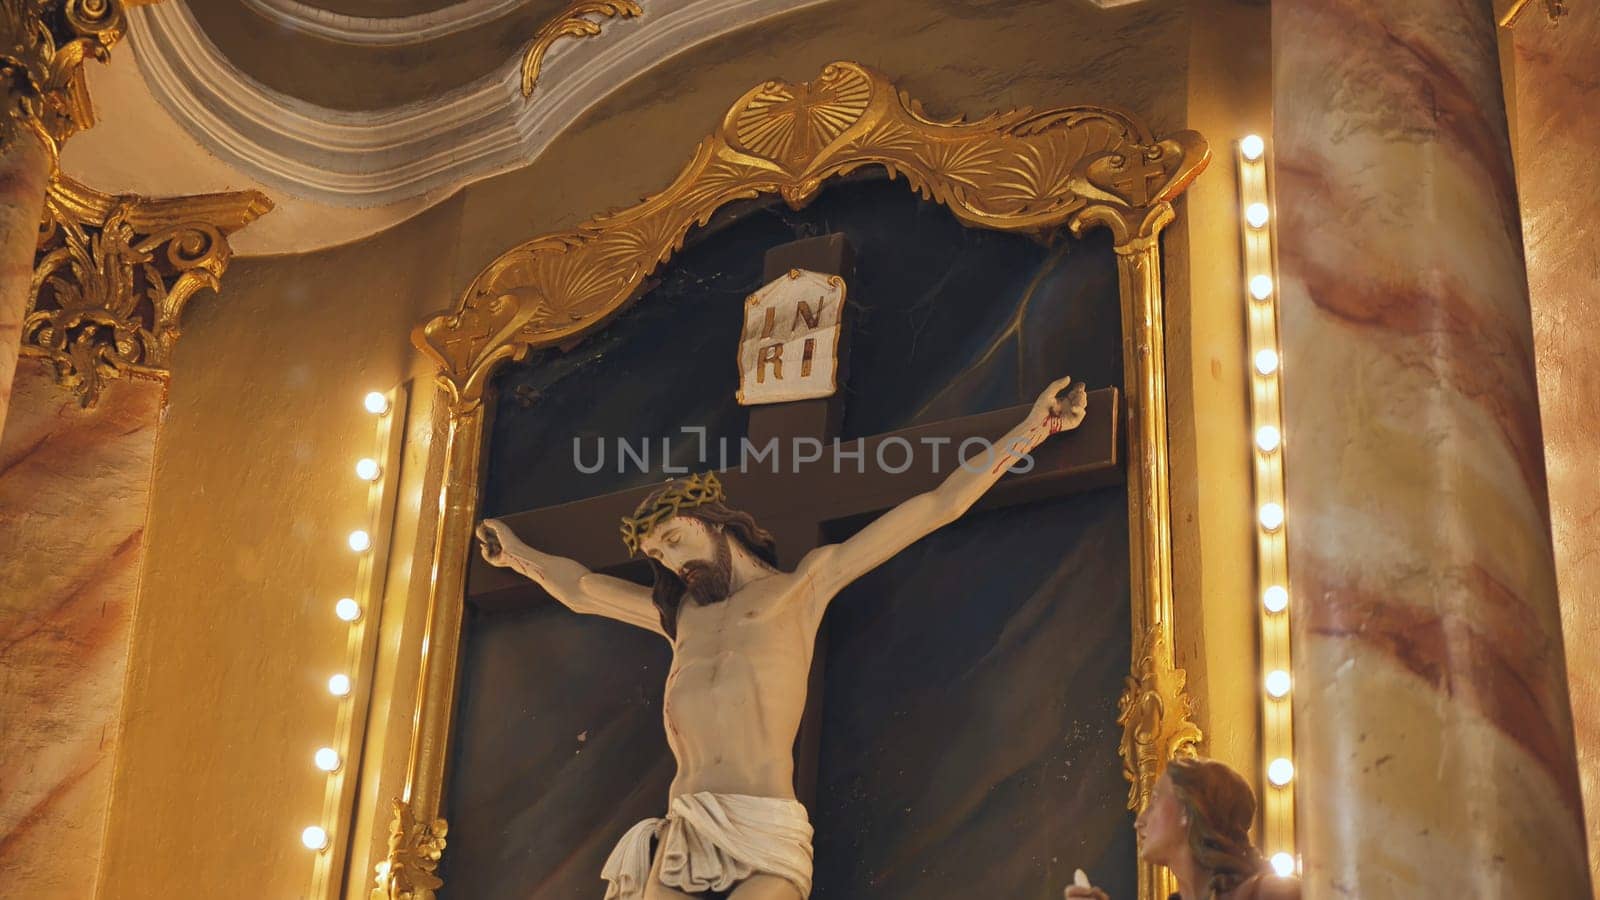 The crucifixion of Jesus in a Catholic church